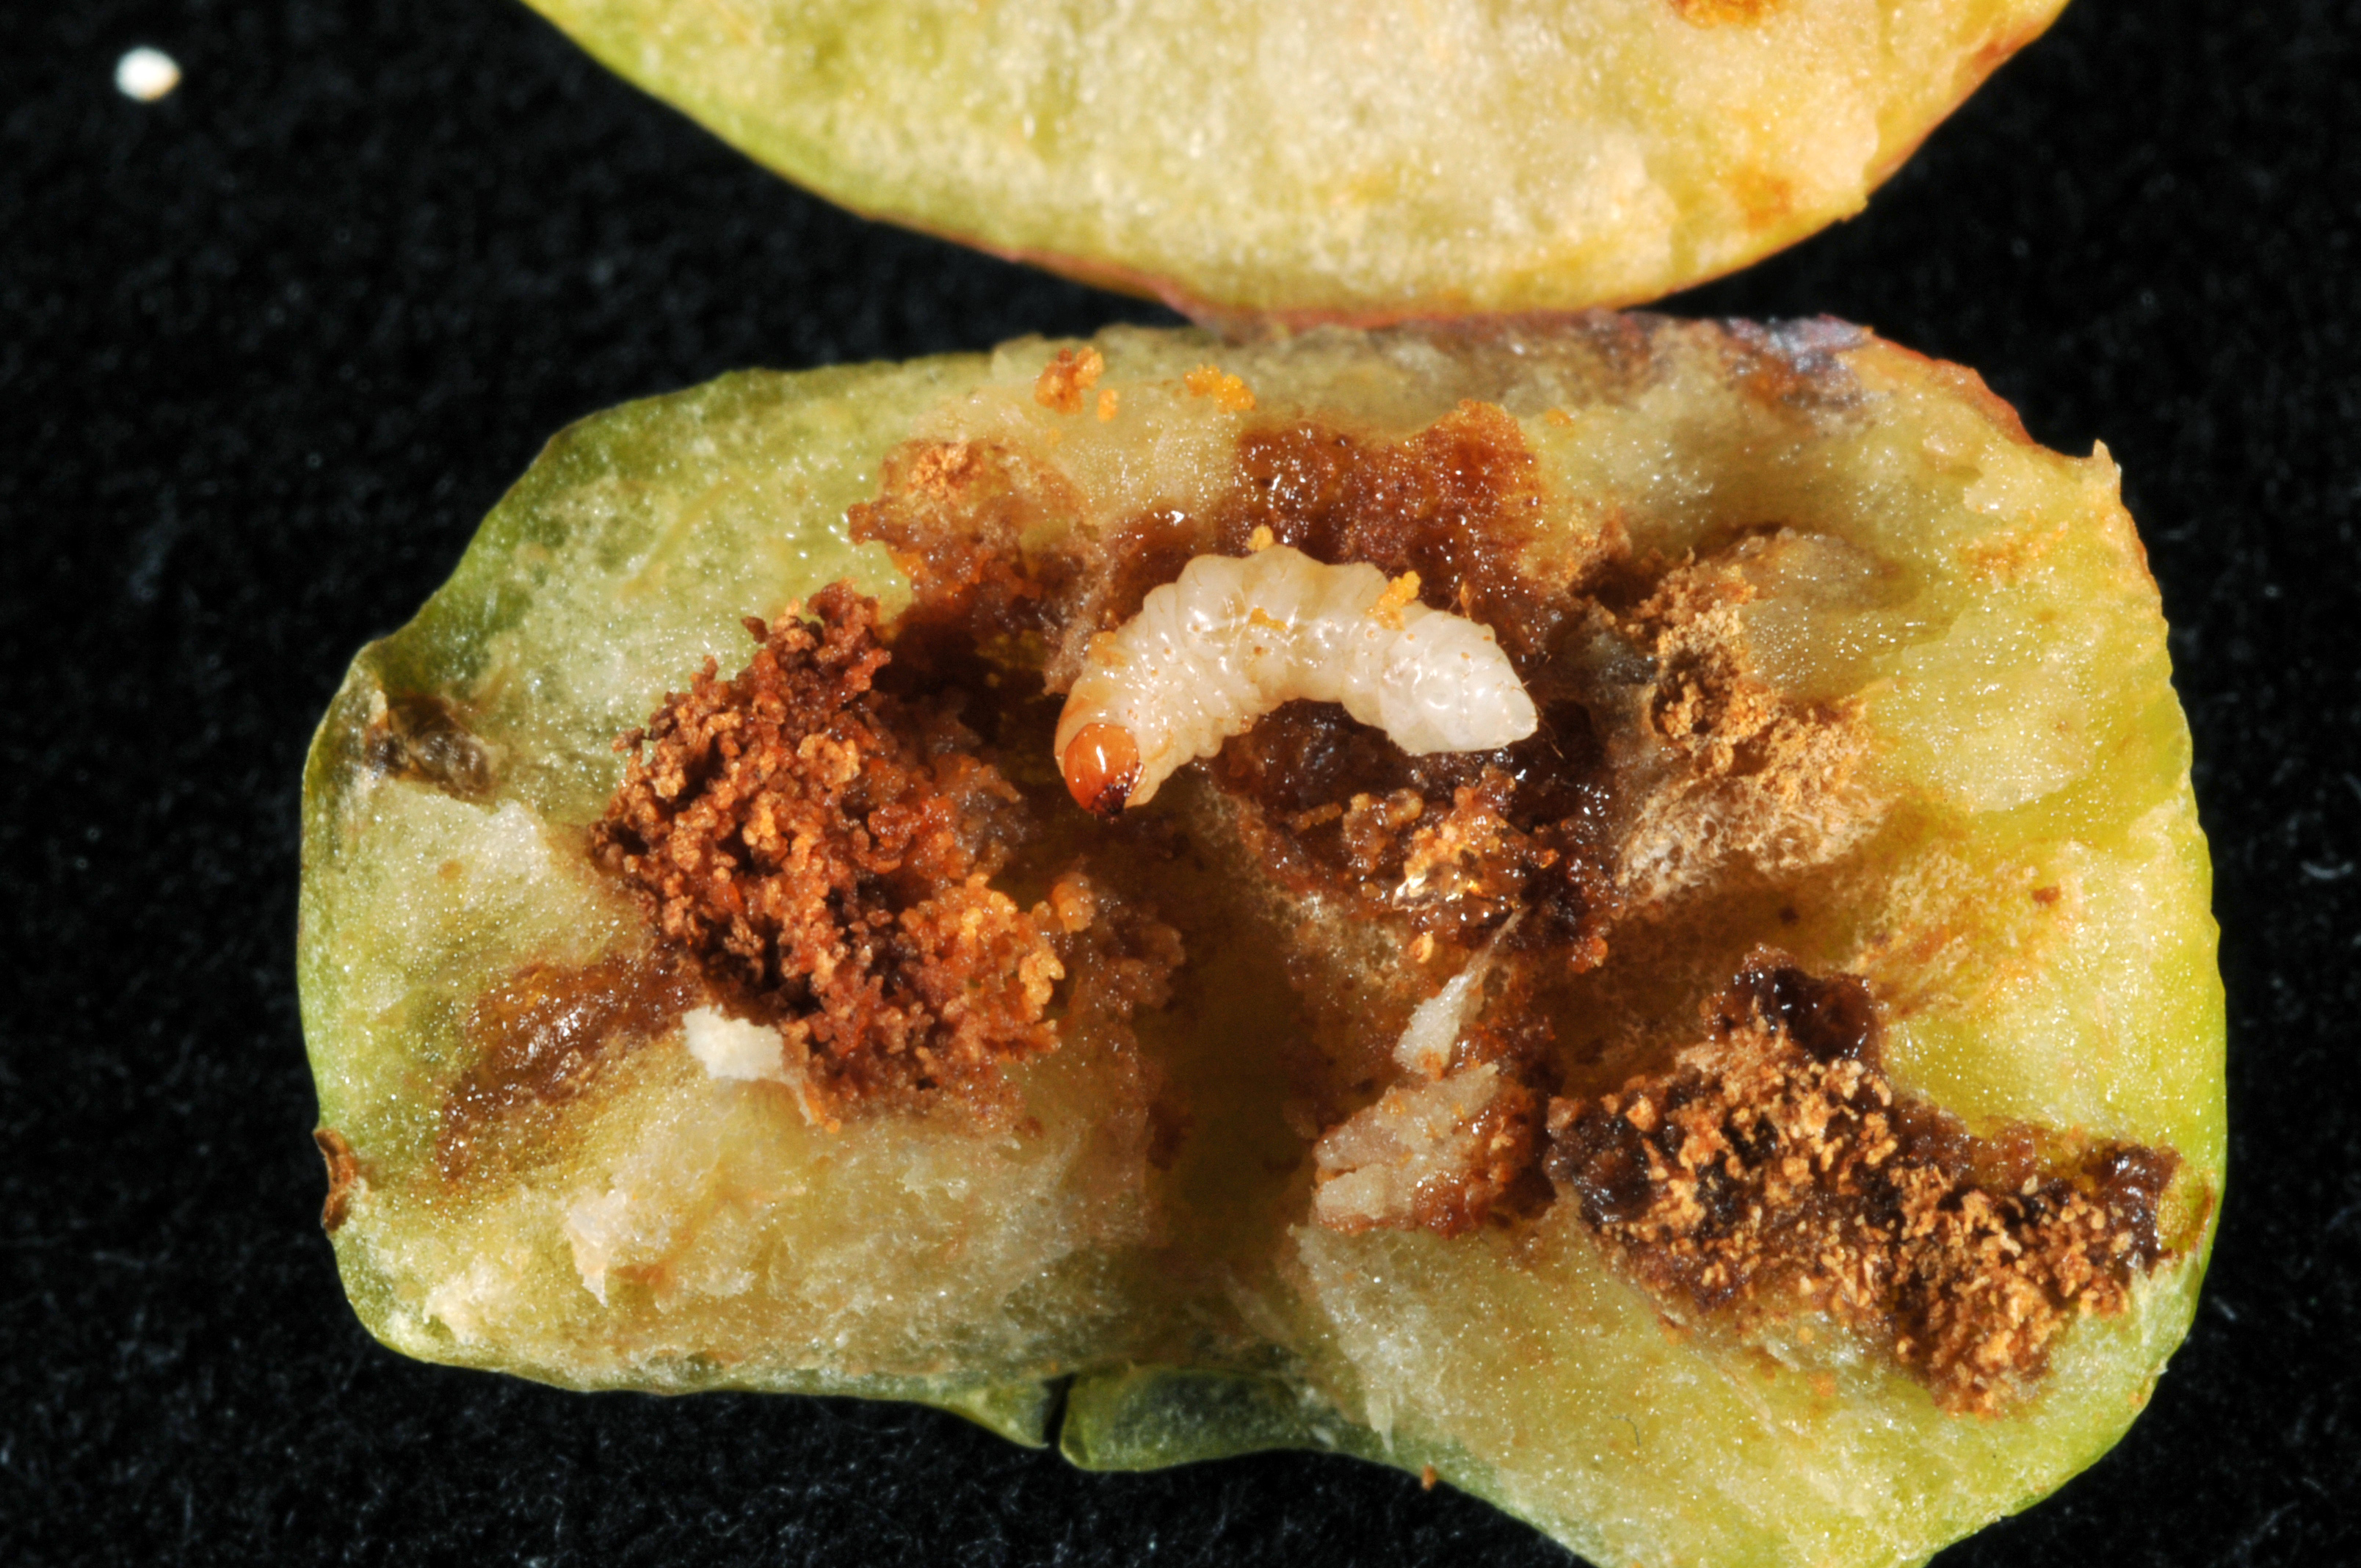 Figure 10. An immature apple cut in half to reveal the cream-colored, legless larva of plum curculio inside, along with feeding damage and insect waste (frass). (<em>Photo credit: John Obermeyer, Purdue Entomology</em>)